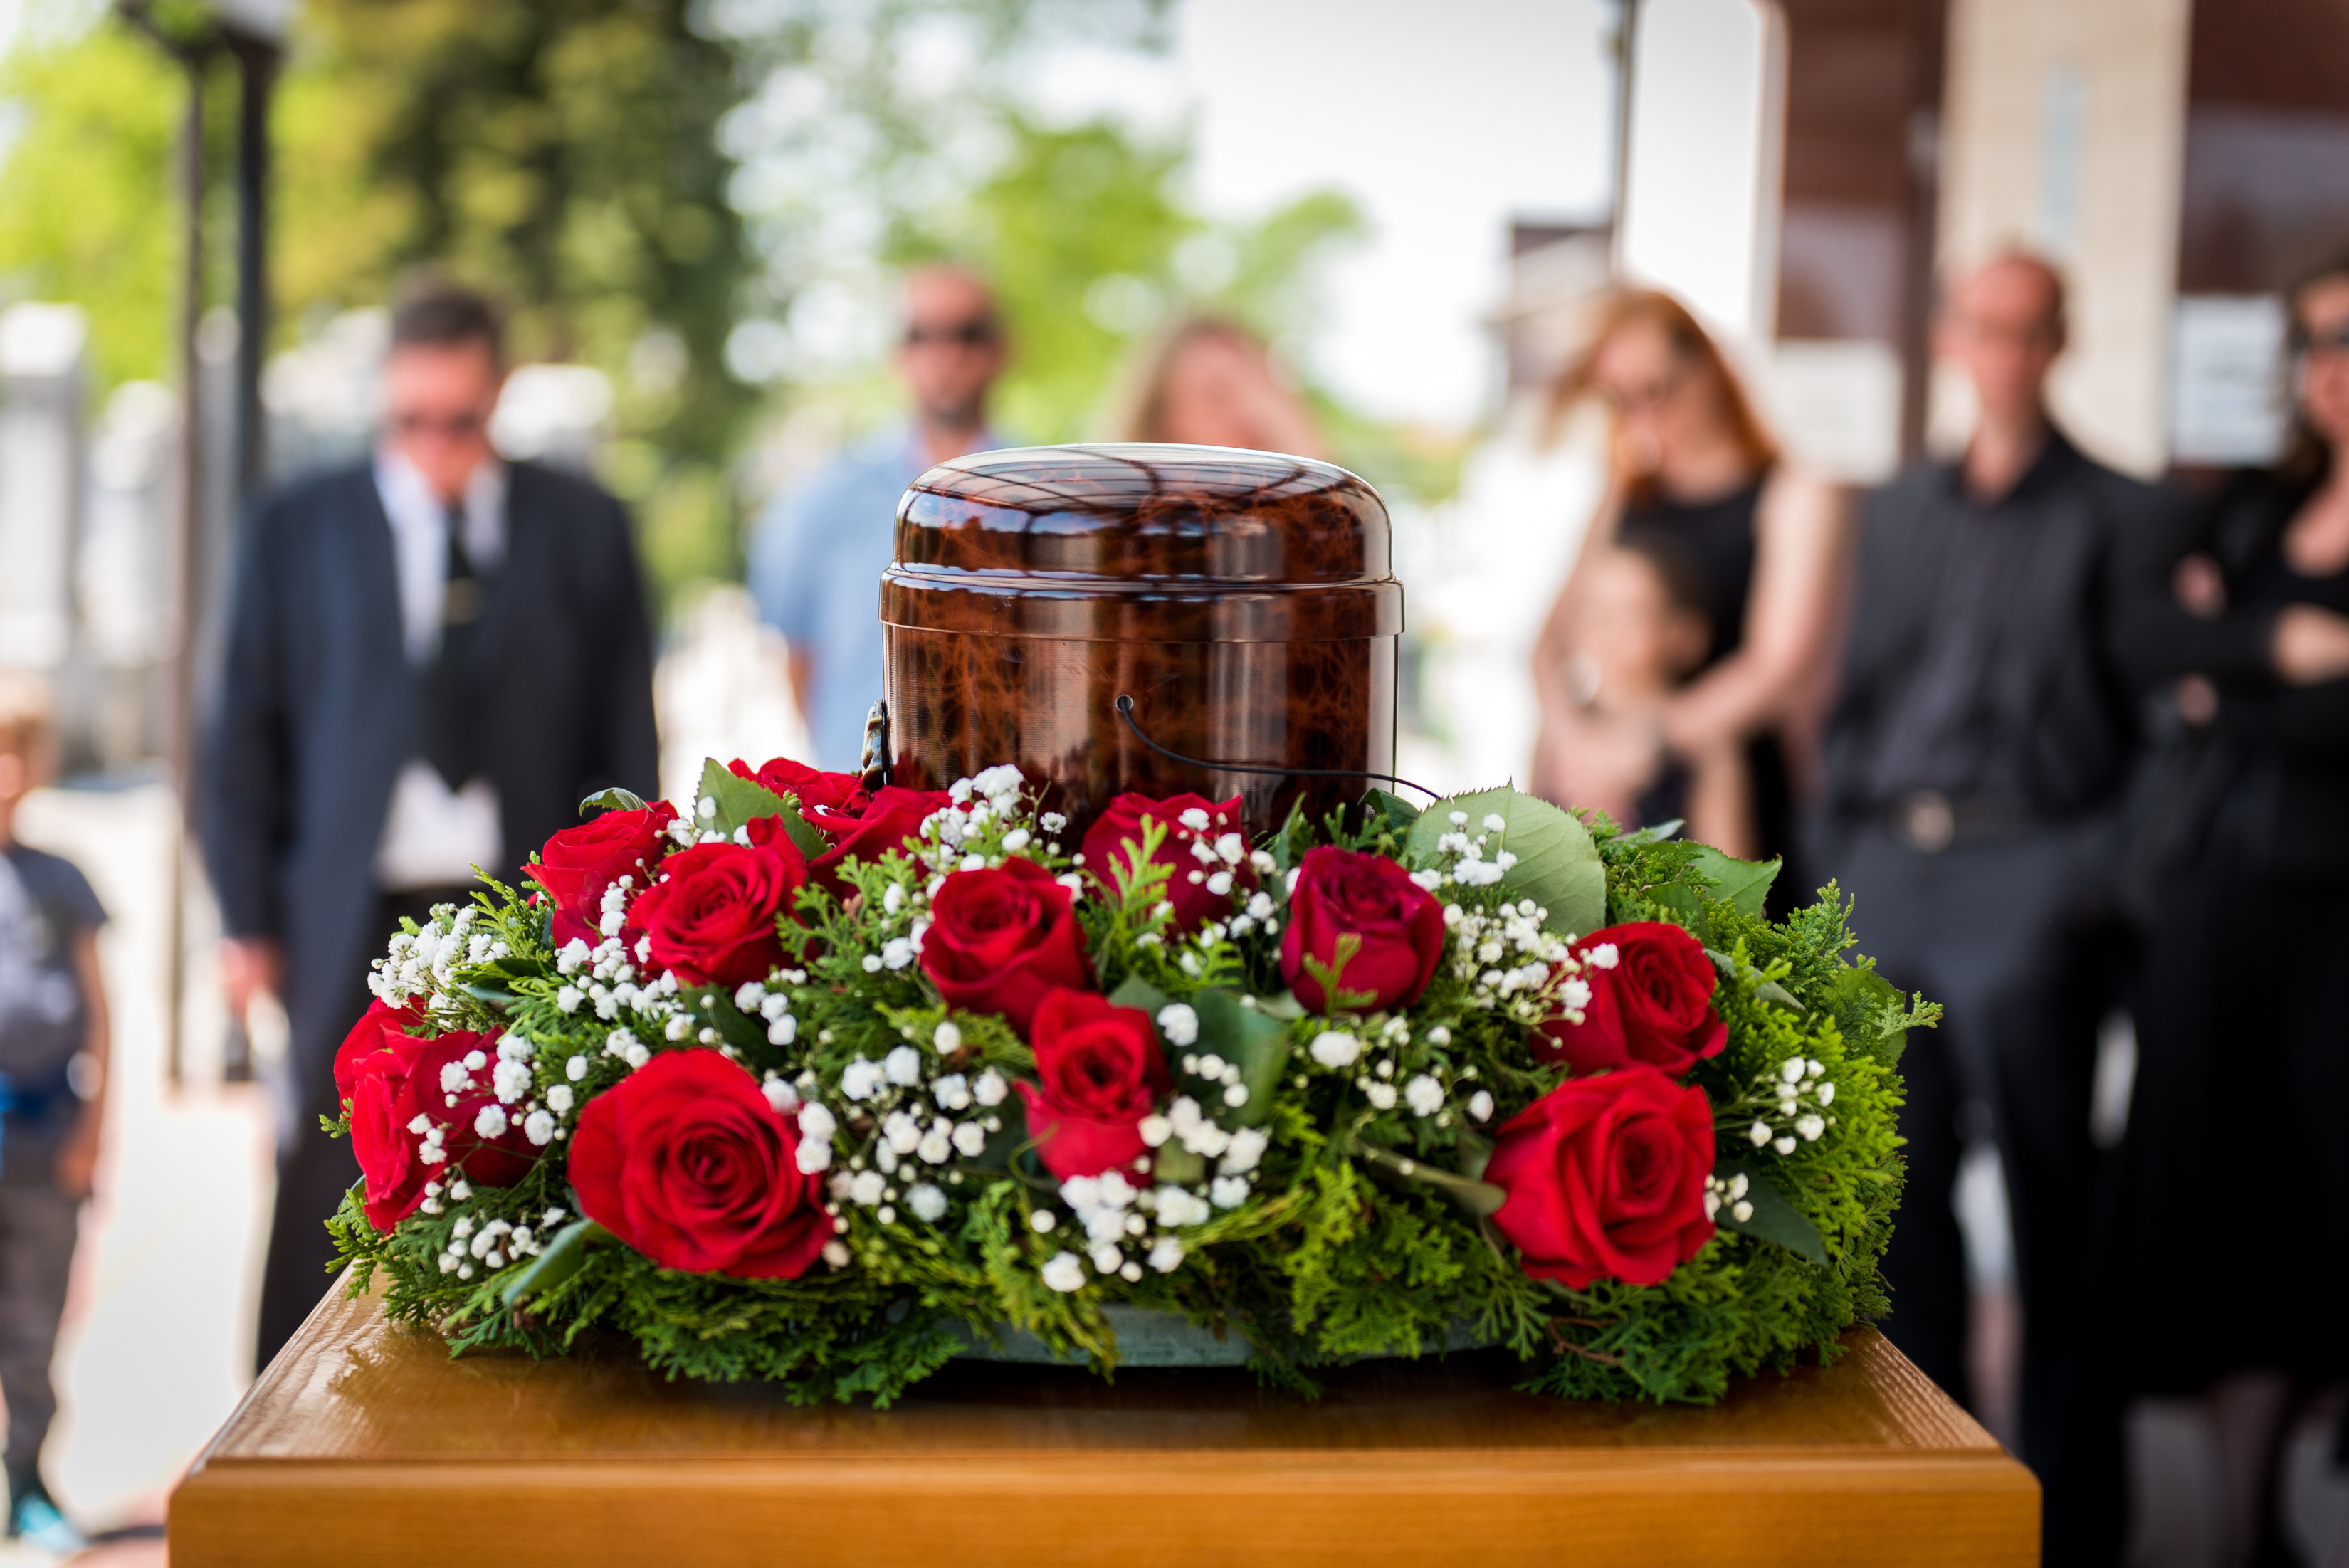 Funerary urn with ashes of dead and flowers at funeral. | Source: Shutterstock